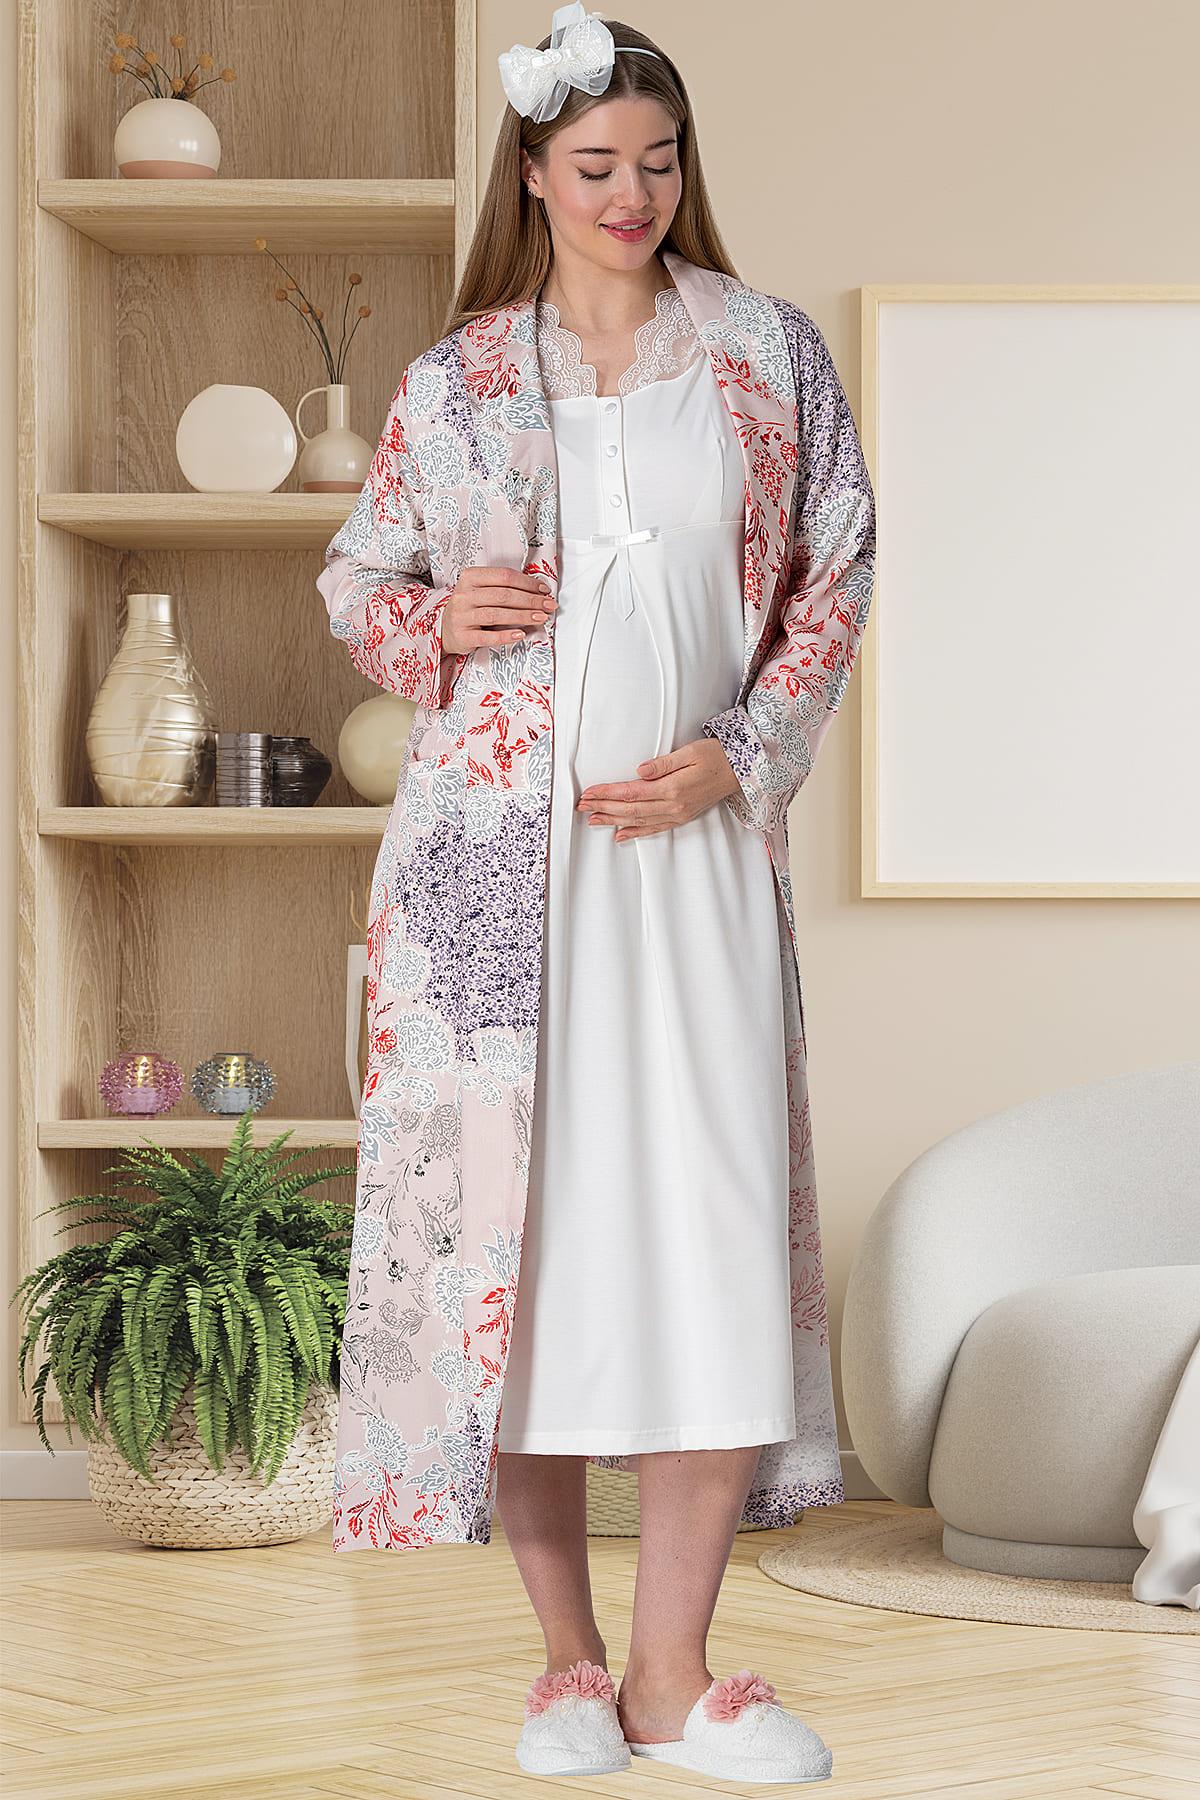 Lace Collar Maternity & Nursing Nightgown With Patterned Robe Powder - 5807